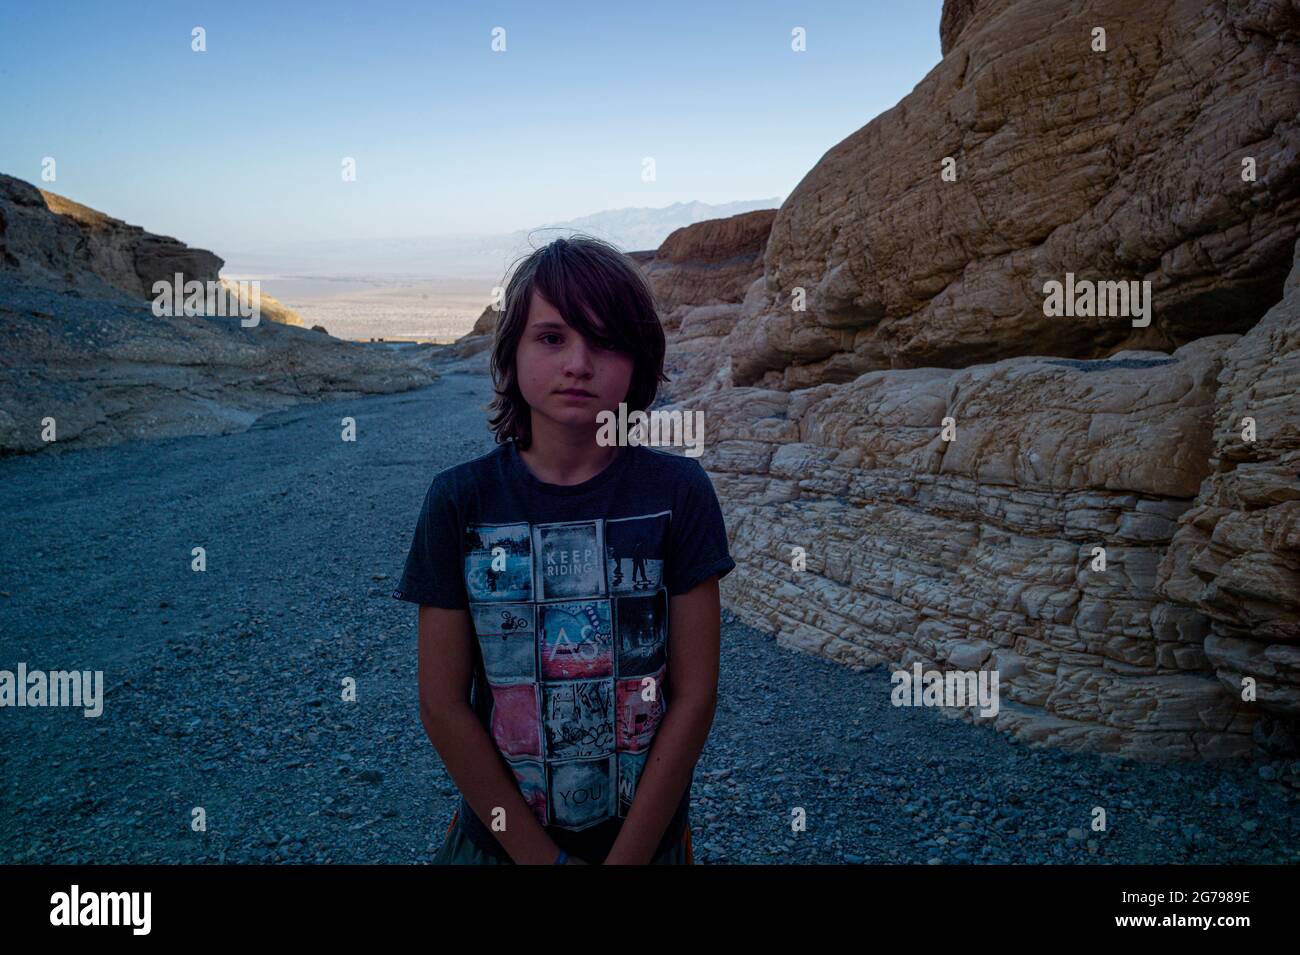 A Caucasian boy, 10-15 years posing in front of rocks in Death Valley, California, USA Stock Photo